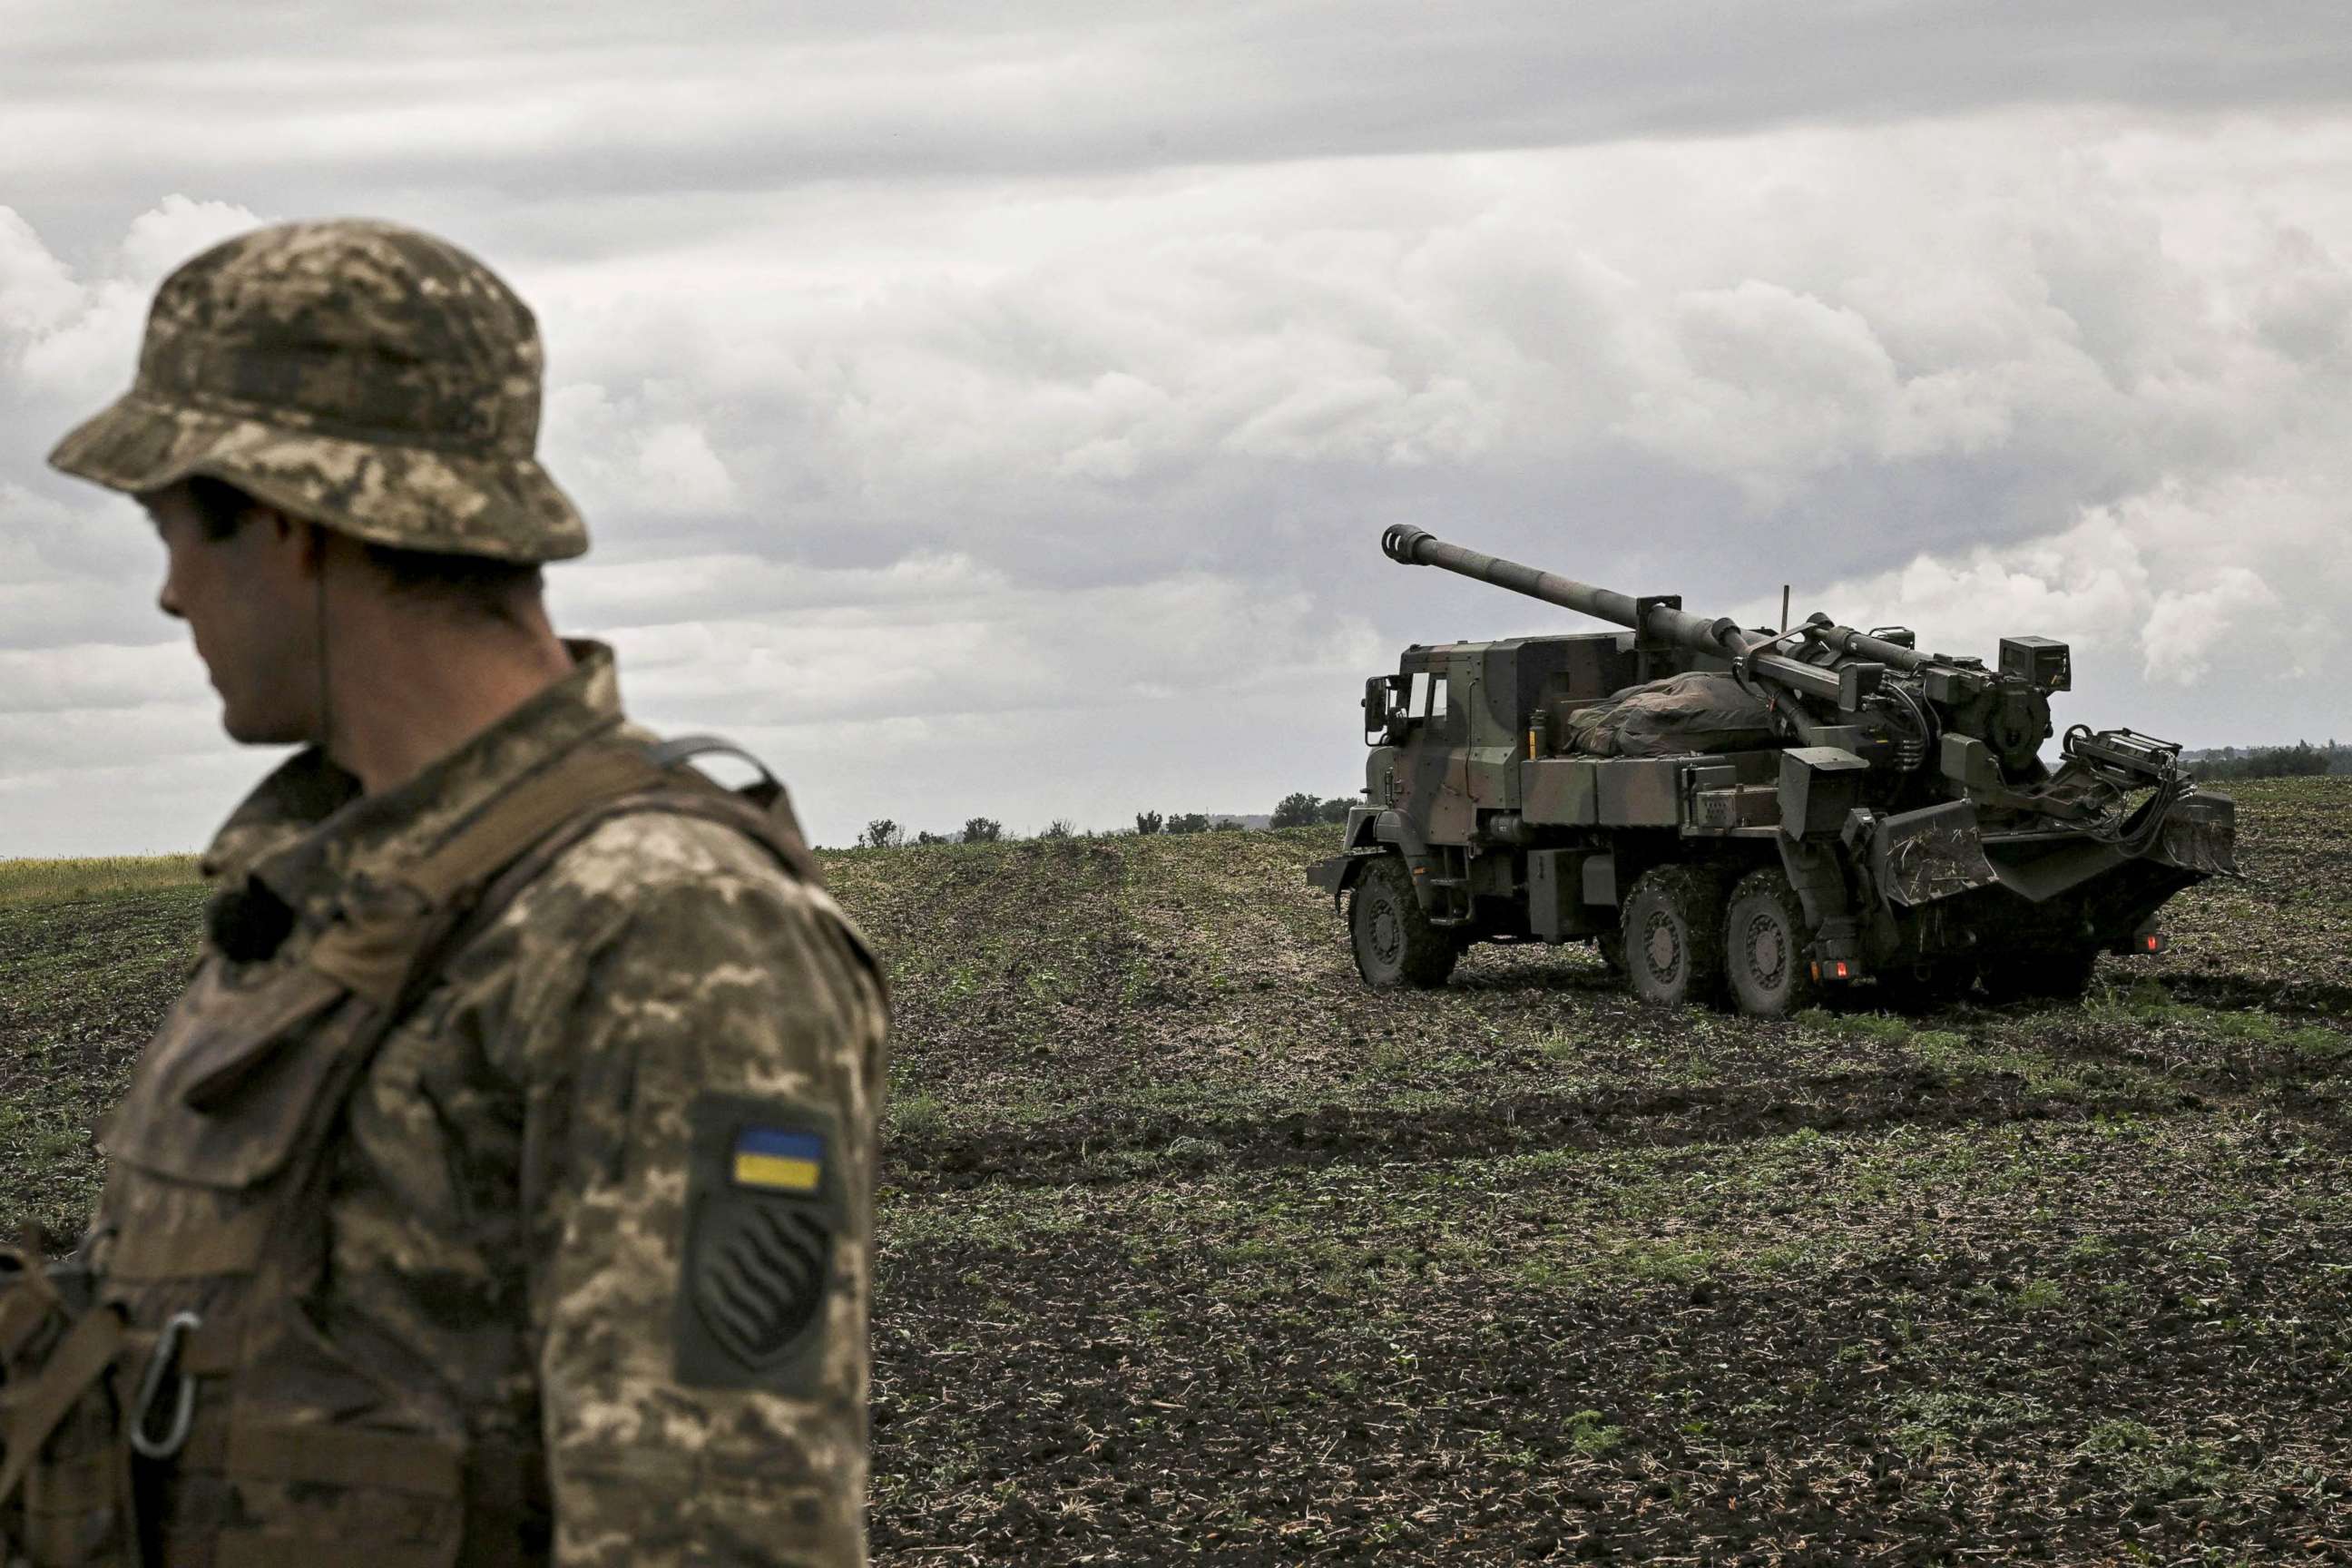 PHOTO: An Ukrainian officer stands in front of a French self-propelled 155 mm/52-calibre gun Caesar at a front line in the eastern Ukrainian region of Donbas, June 15, 2022.